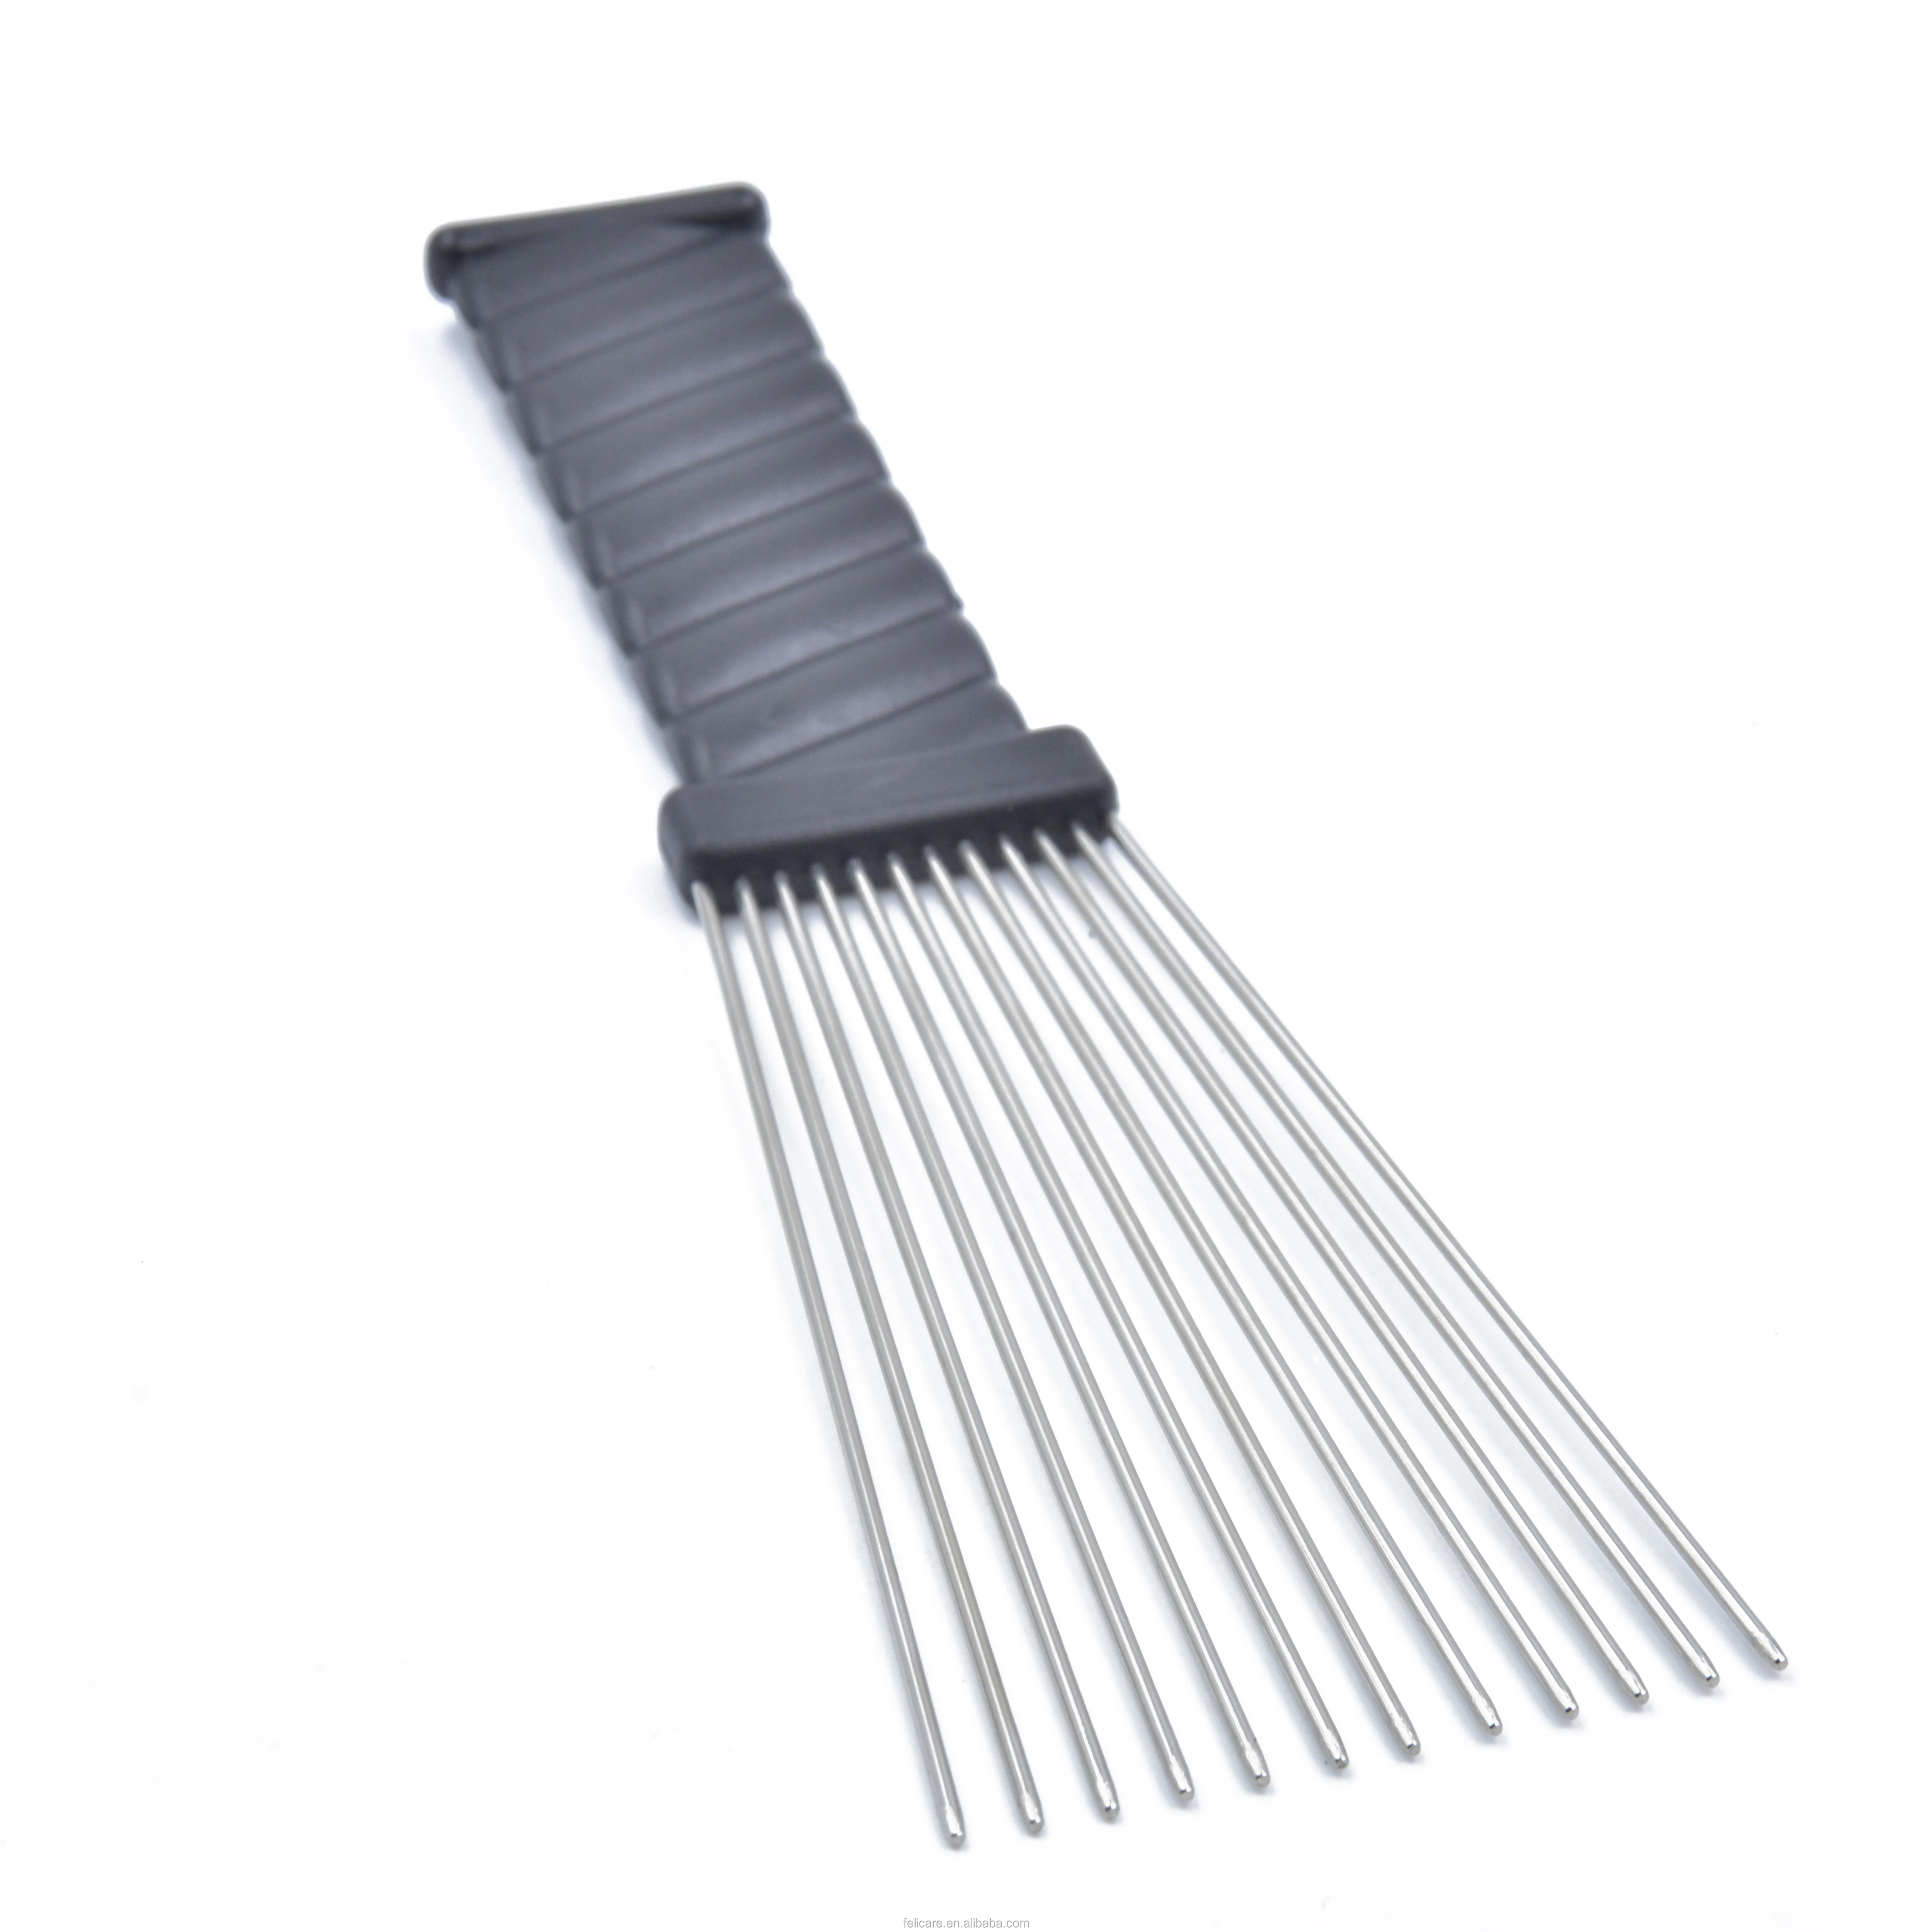 Afro Comb Metal Pick Comb Afro Braid Pick Hairdressing Detangle Wig Braid  Hair Styling Comb Styling Tool - Buy Hair Brush Comb,Metal Comb,Comb  Product on Alibaba.com